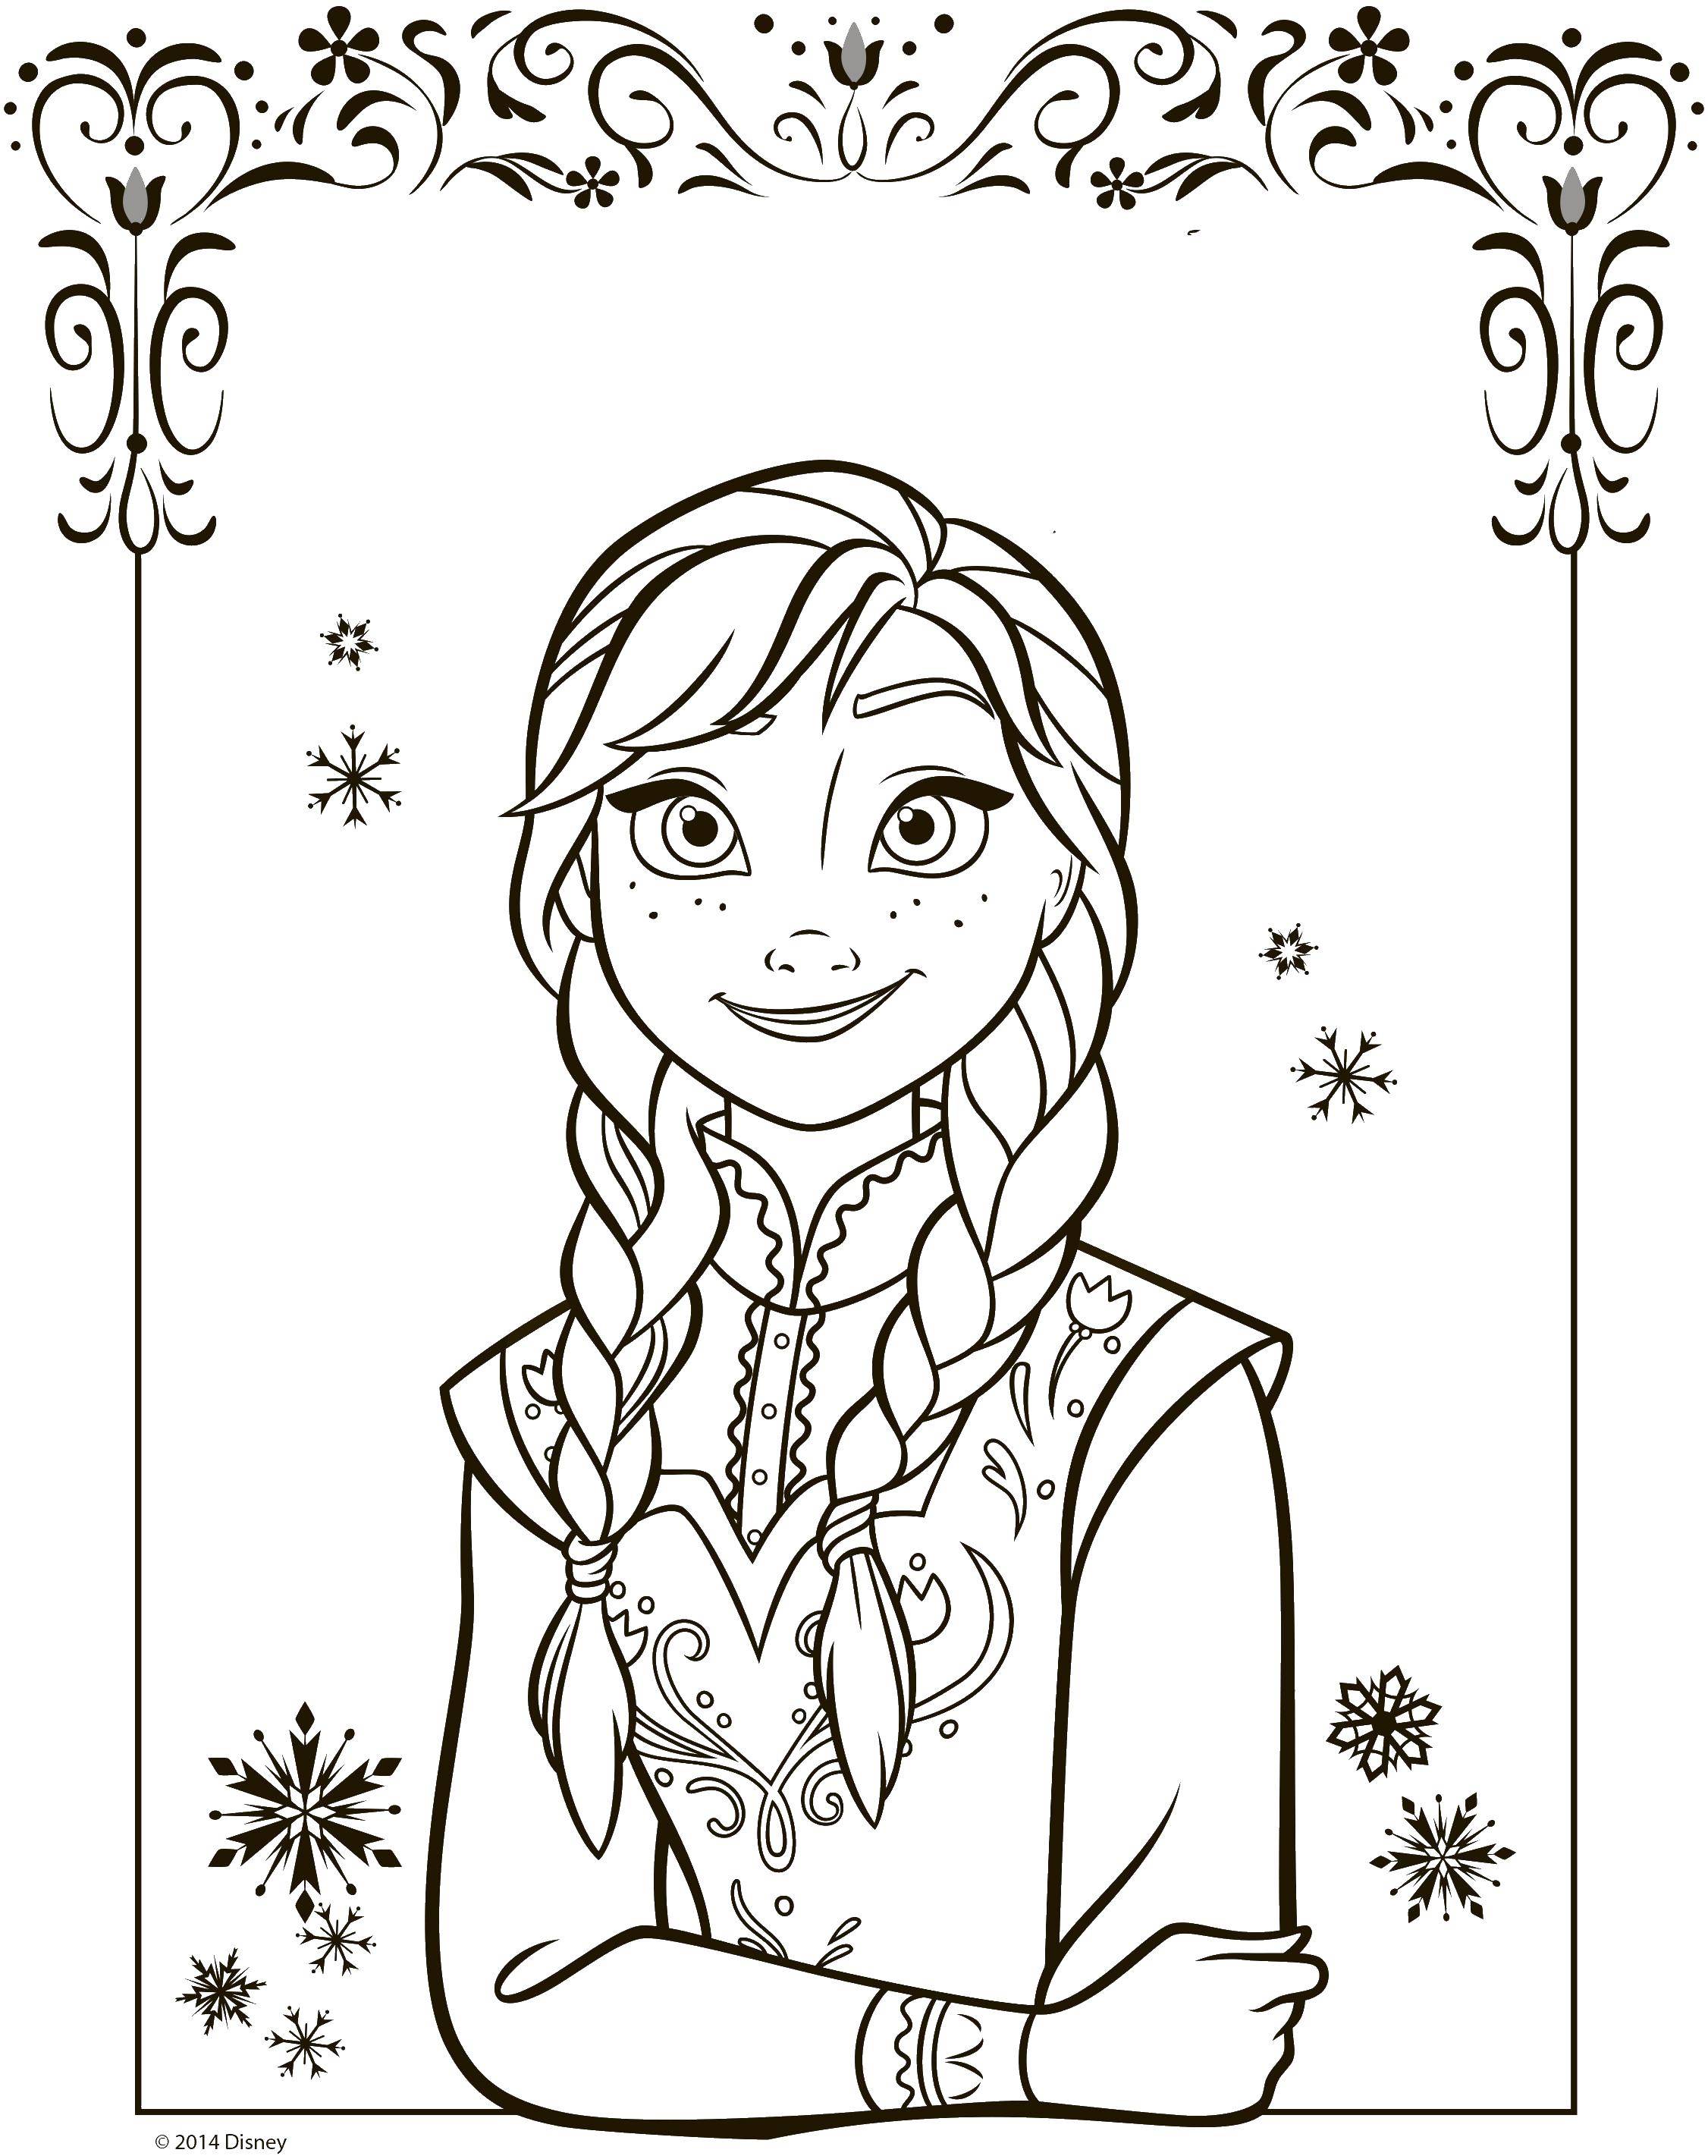 Coloring Freckles Anna. Category coloring cold heart. Tags:  Disney, Elsa, frozen, Princess.